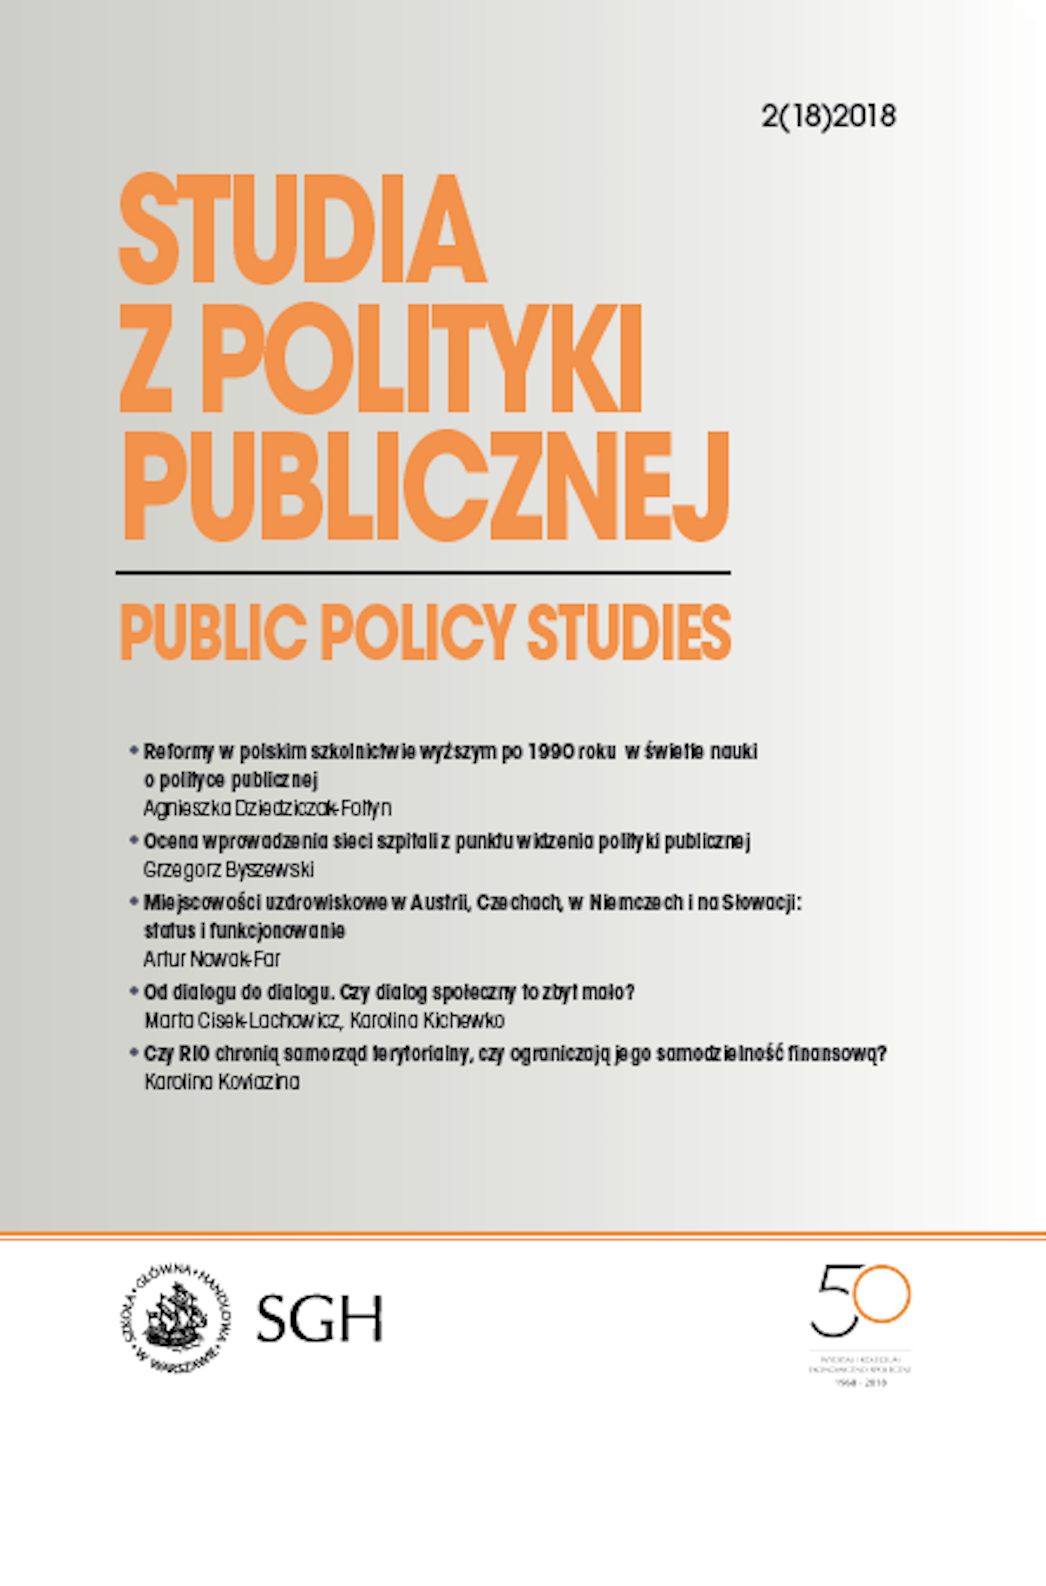 The third scientific seminar from the Public Policy Teaches at the College of Economics and Social Sciences of the Warsaw School of Economics Cover Image